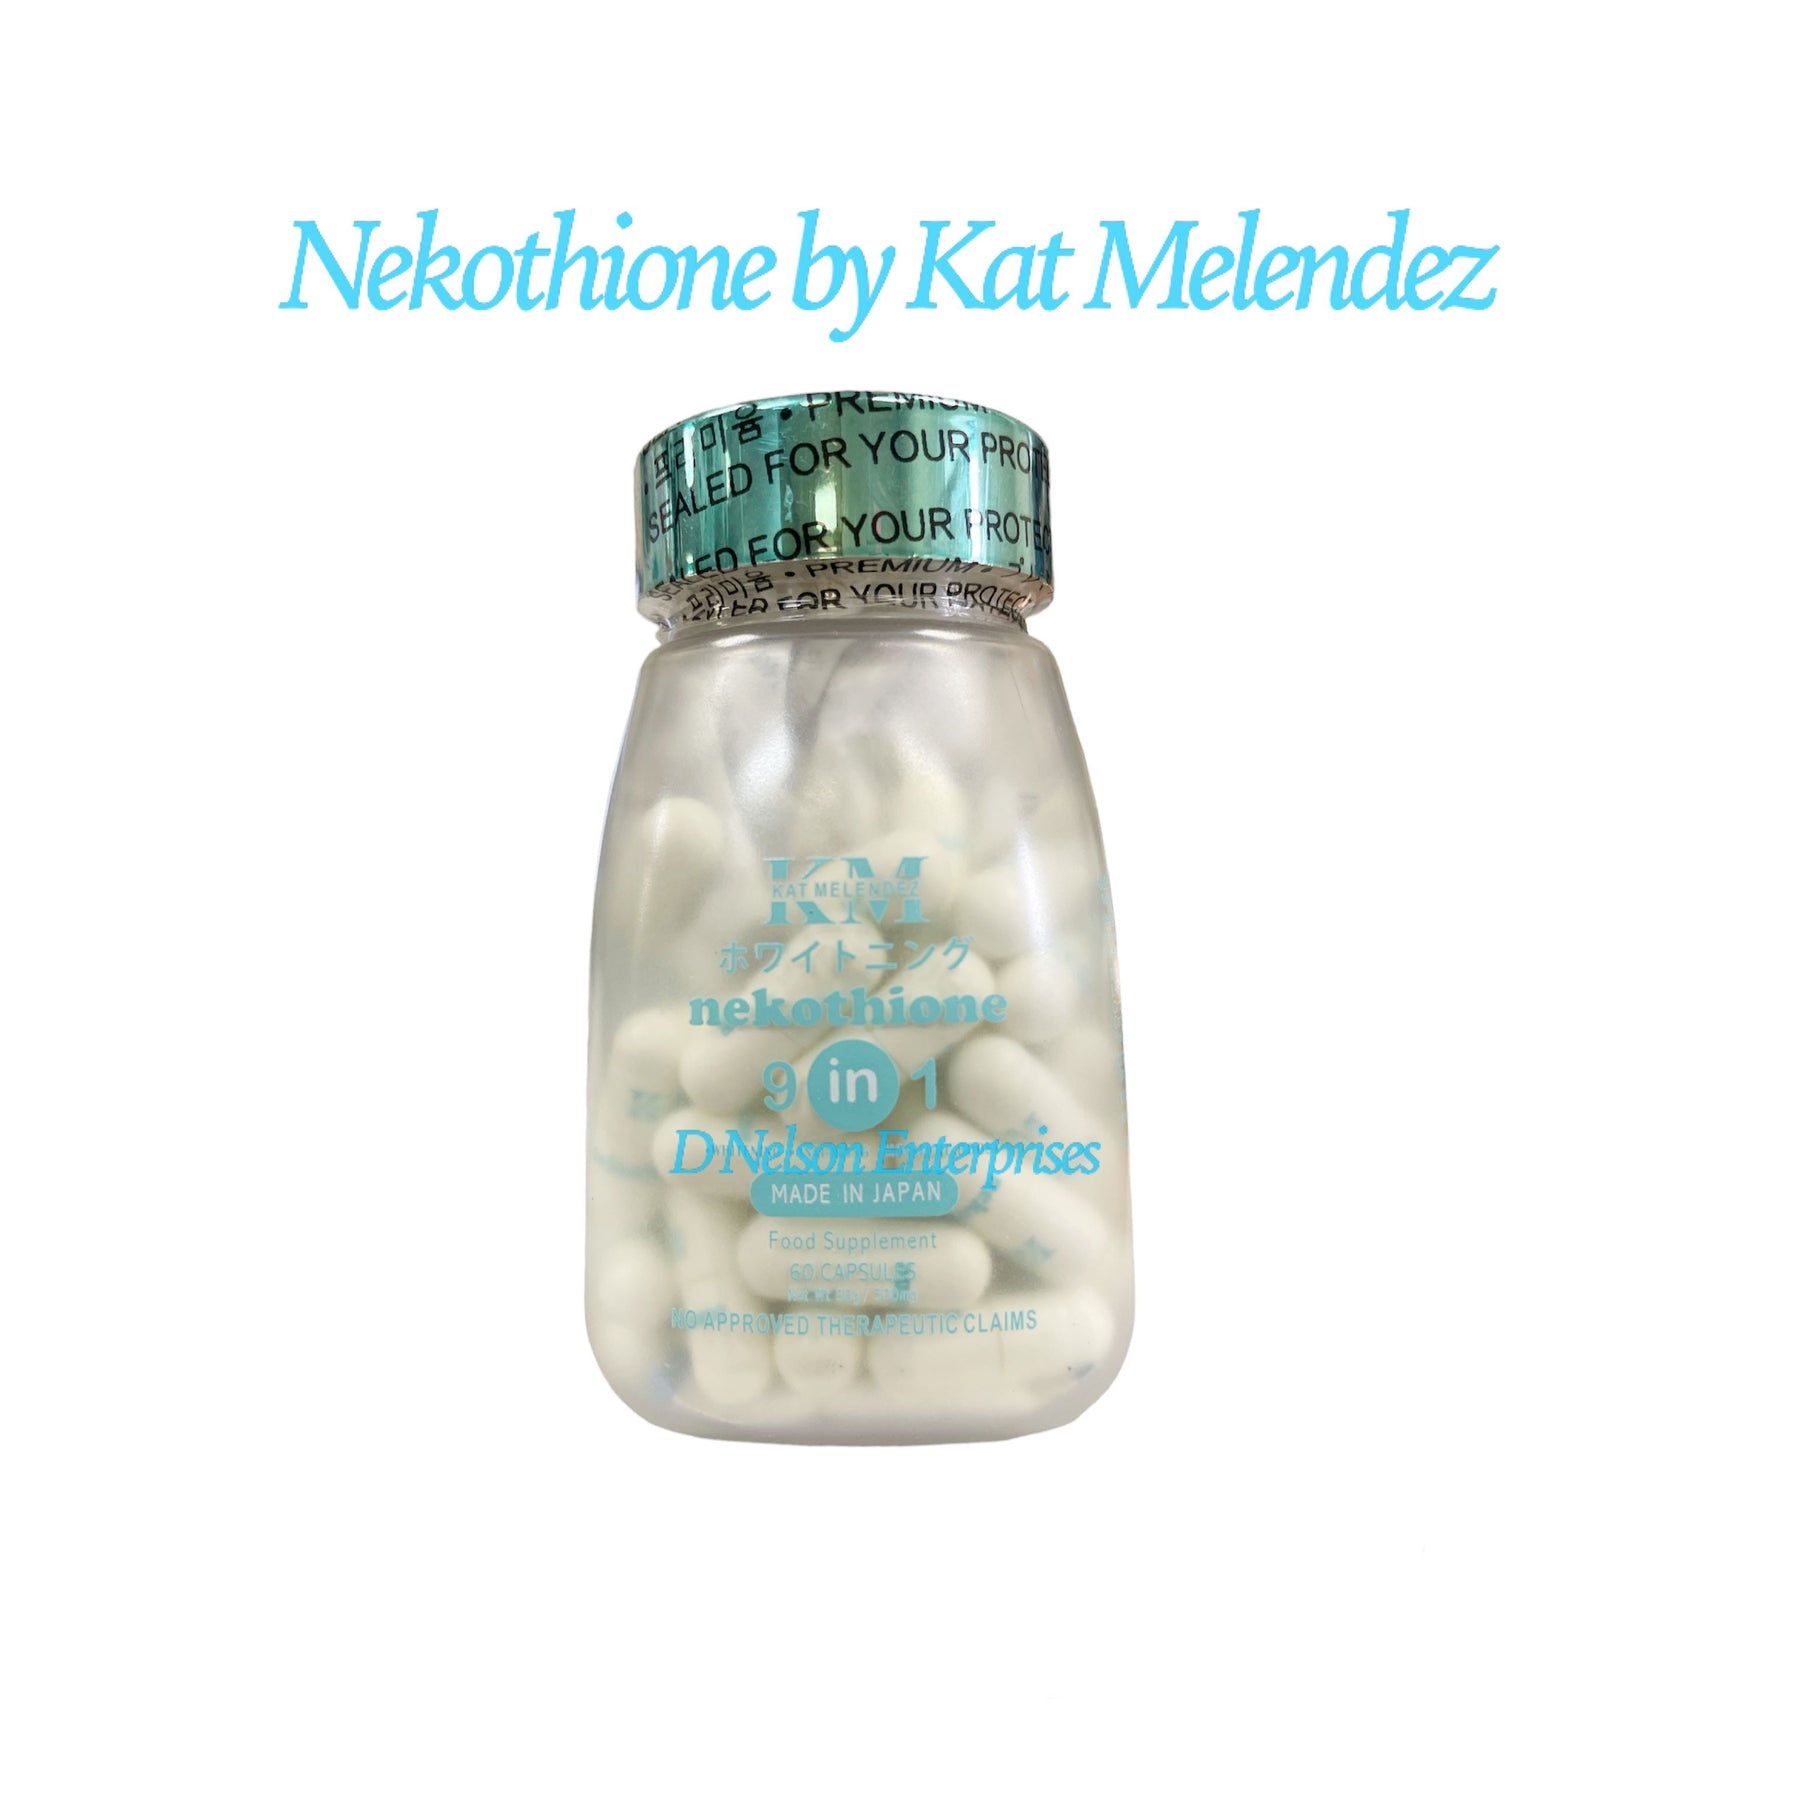 Nekothione 9 IN 1 By Kath Melendez, 60 Capsules